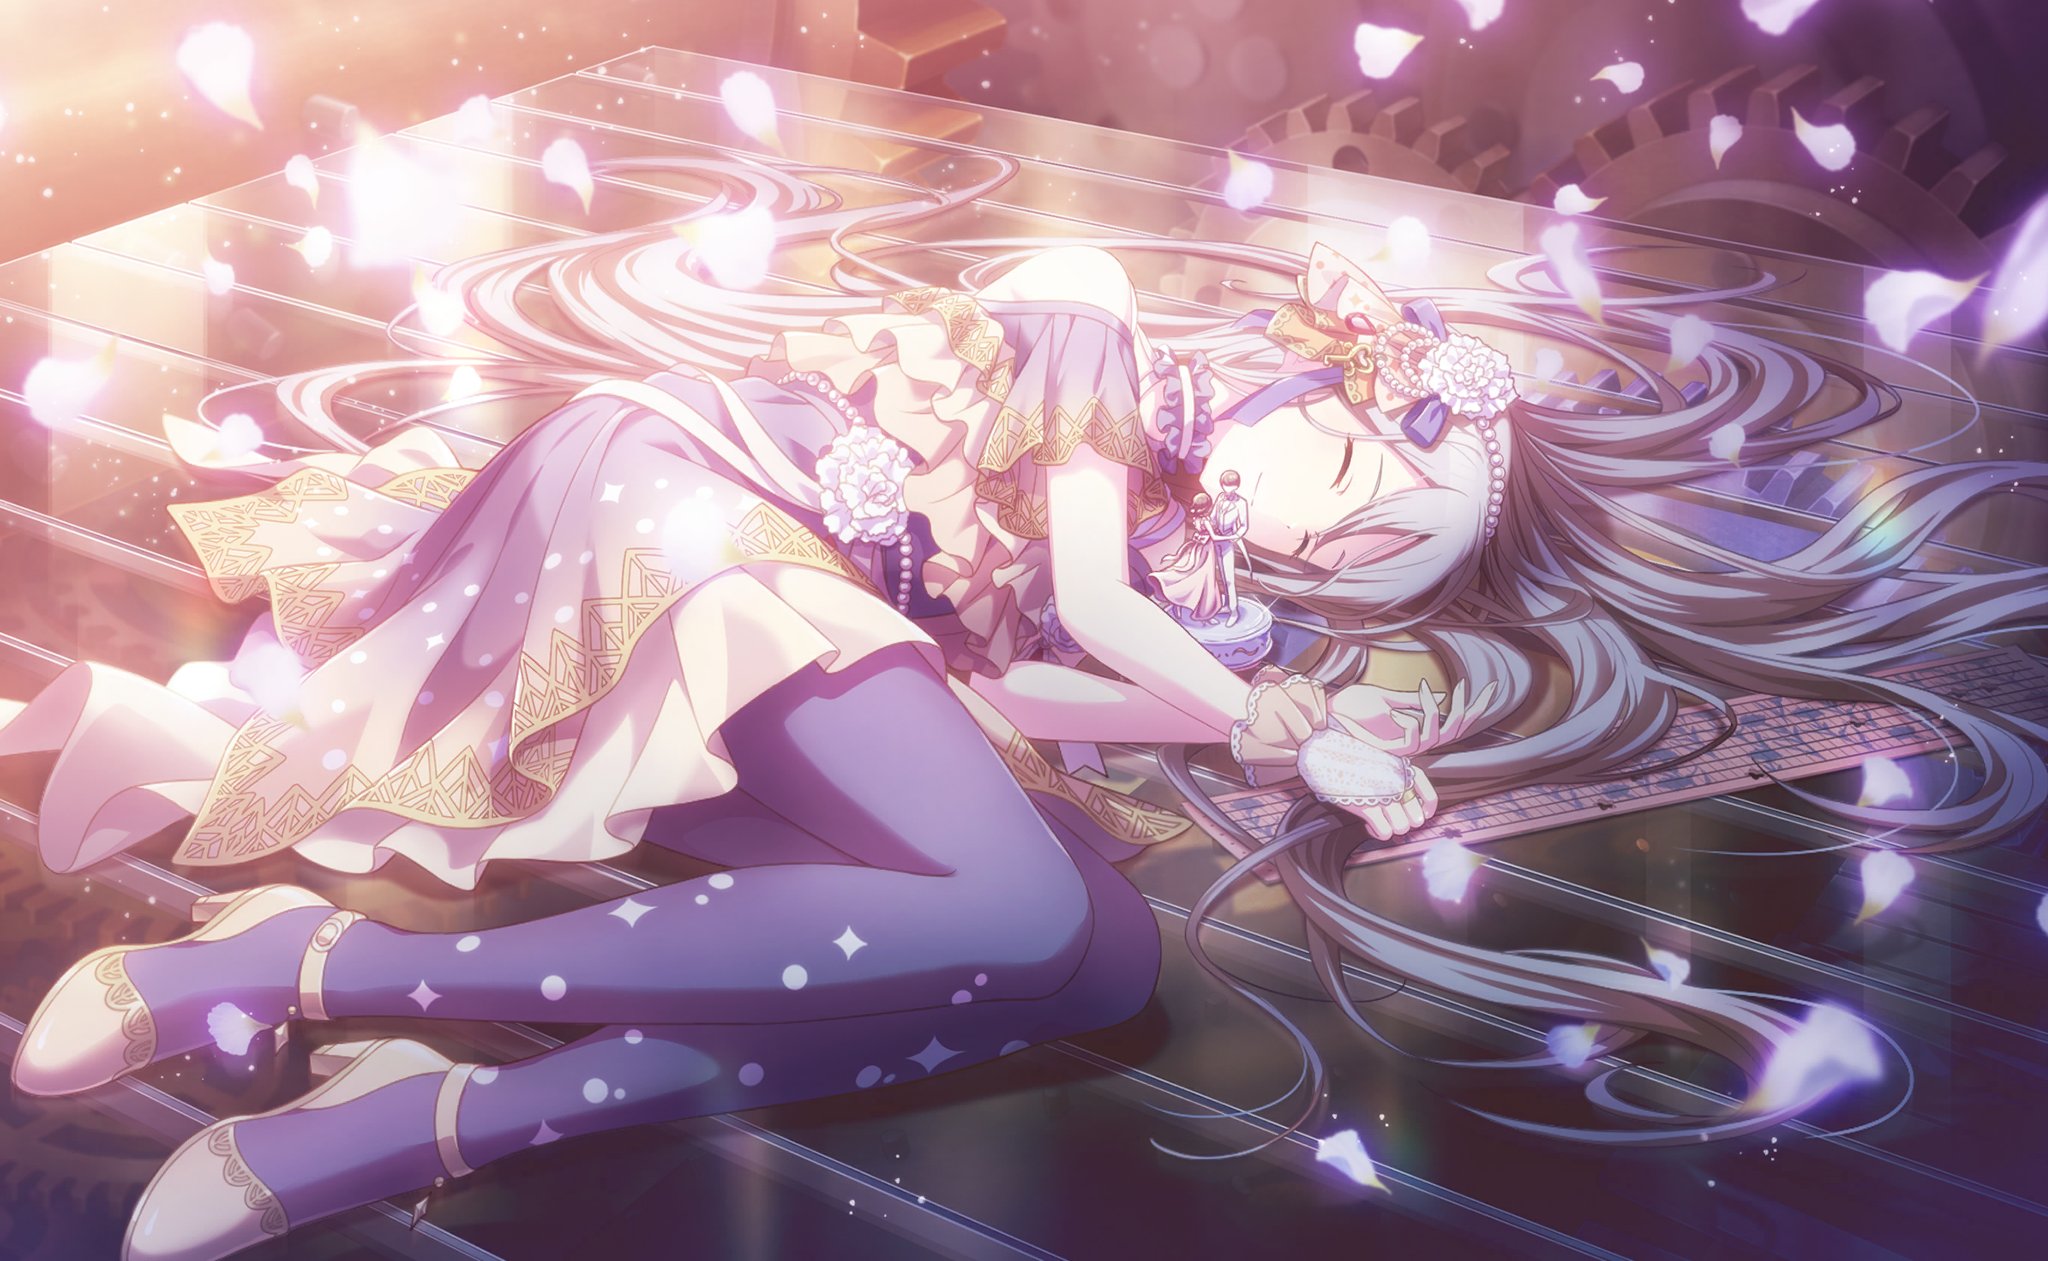 Project Sekai ENG (Unofficial) - [Flowerbed of Memories] Gacha 4 Yoisaki Kanade Type: Mysterious Max Stats: Performance Technique Stamina Max Skill: Flower Therapy